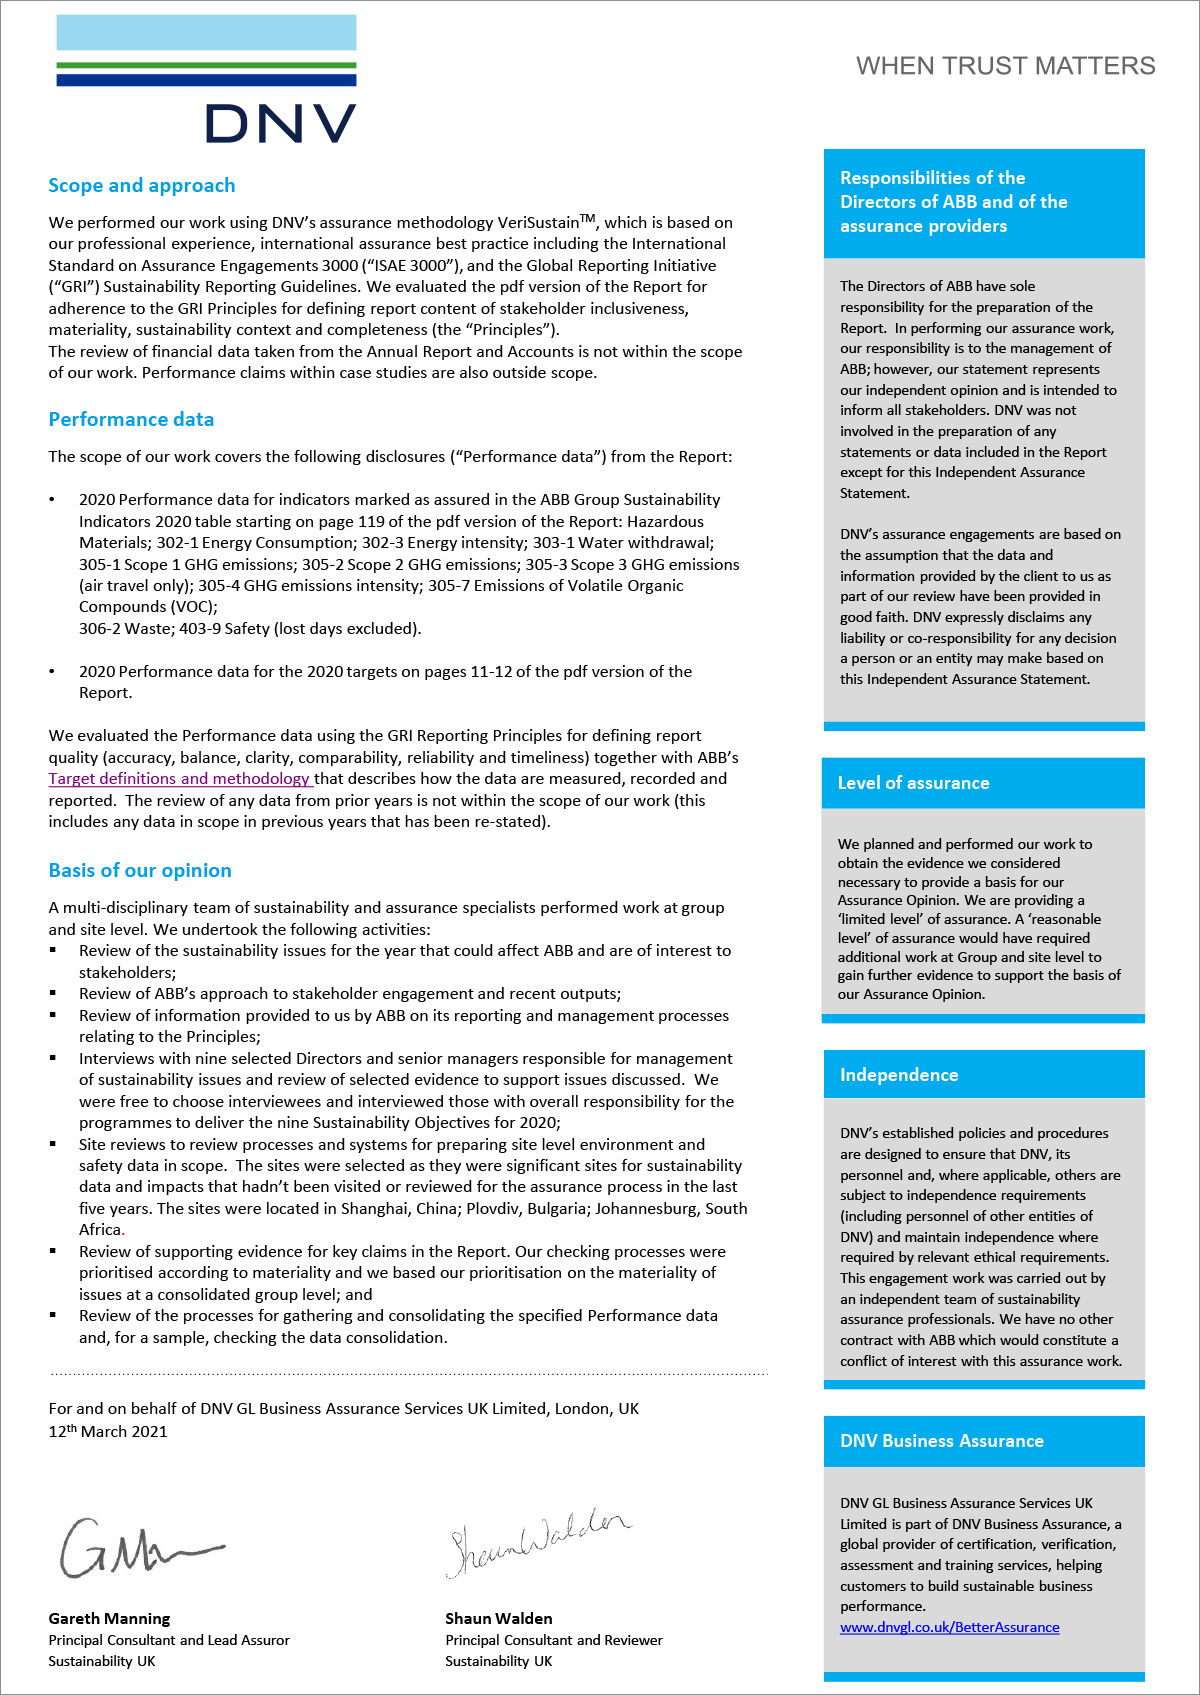 DNV GL assurance statement (page 2 of 2) (graphic)